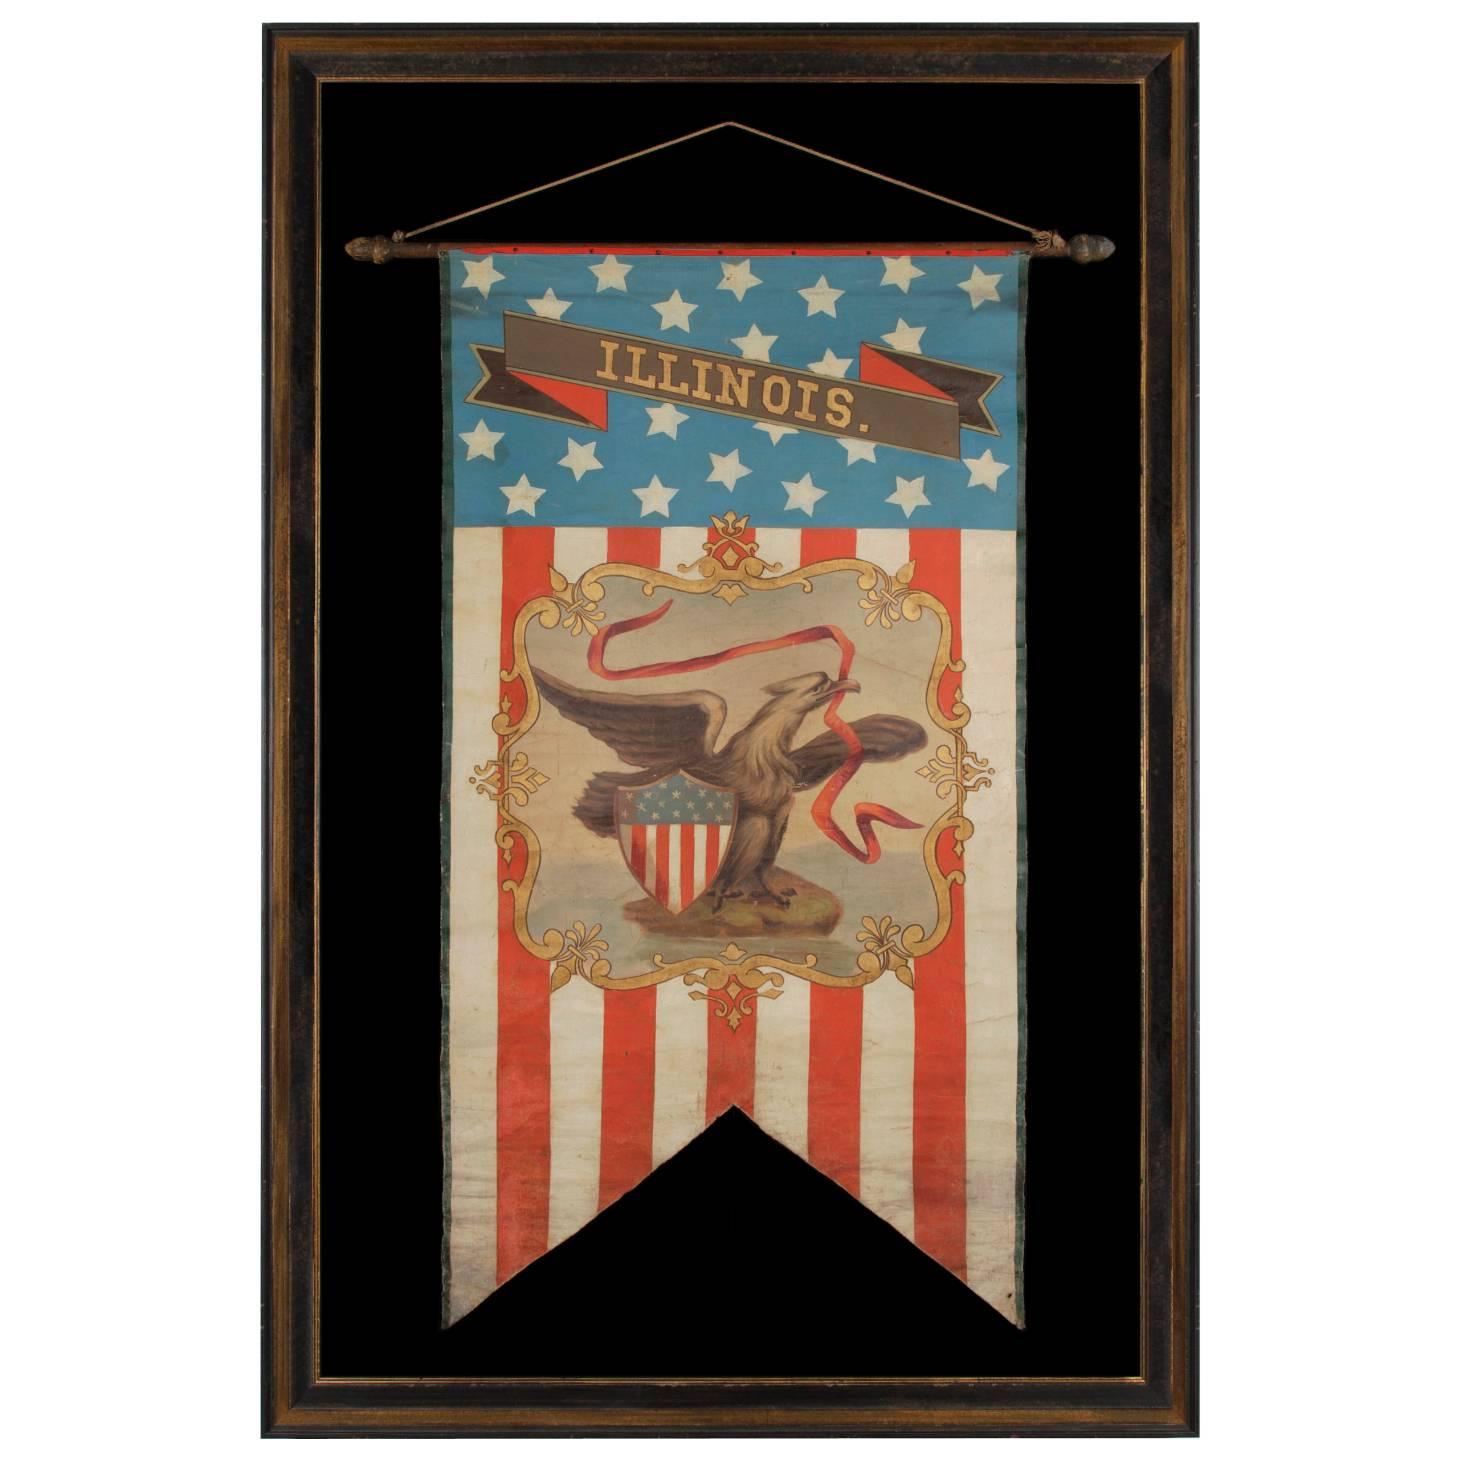 Hand-Painted Patriotic Banner With The Seal of the State of Illinois